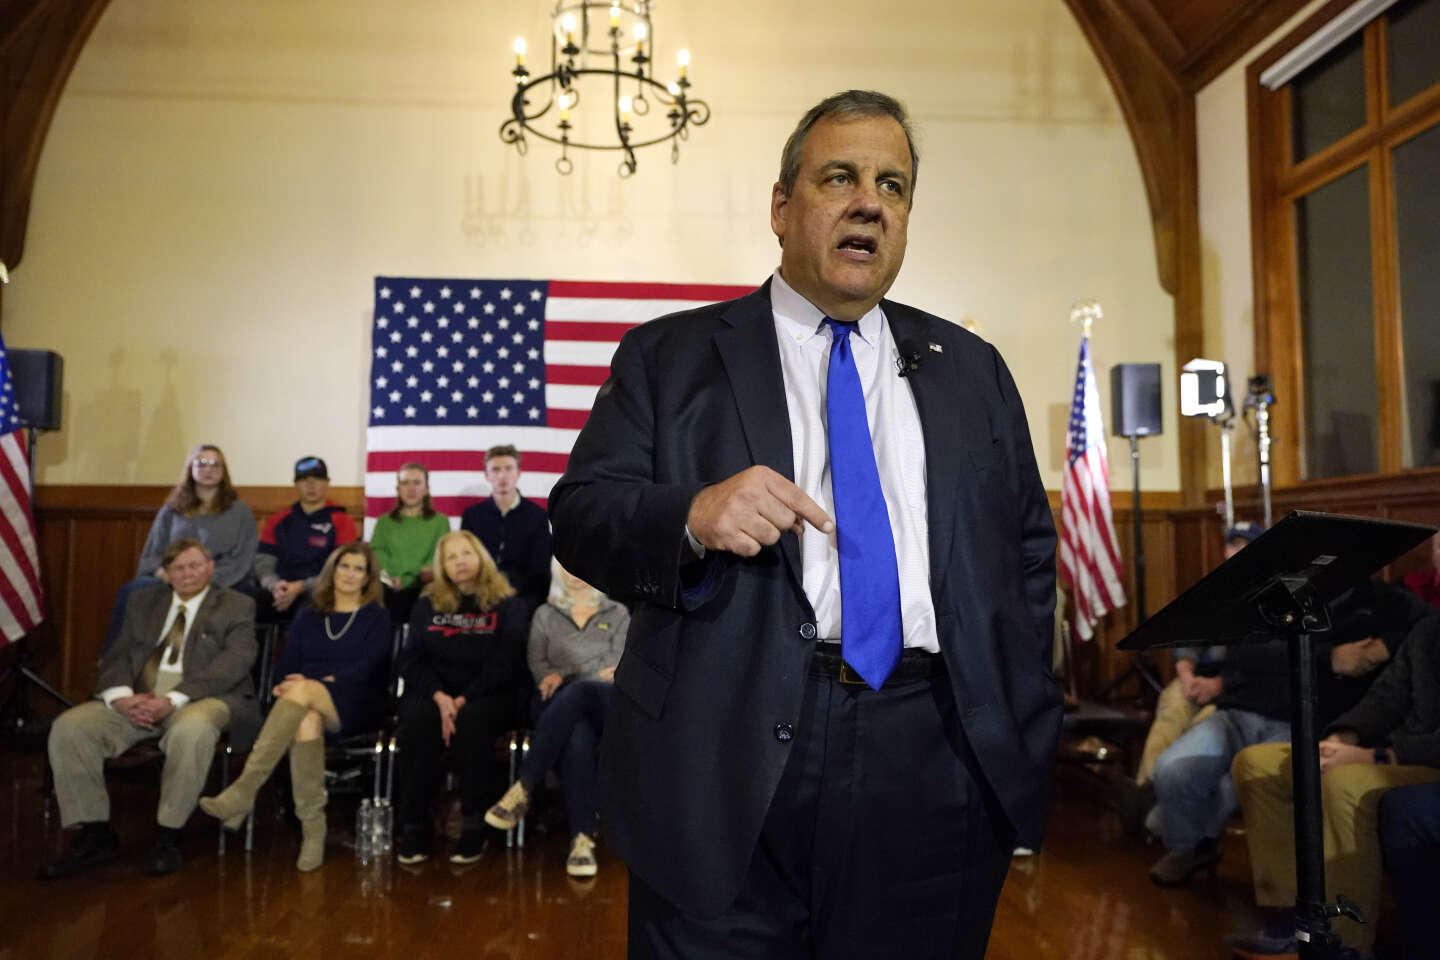 Republican candidate Chris Christie has announced his withdrawal from the primary